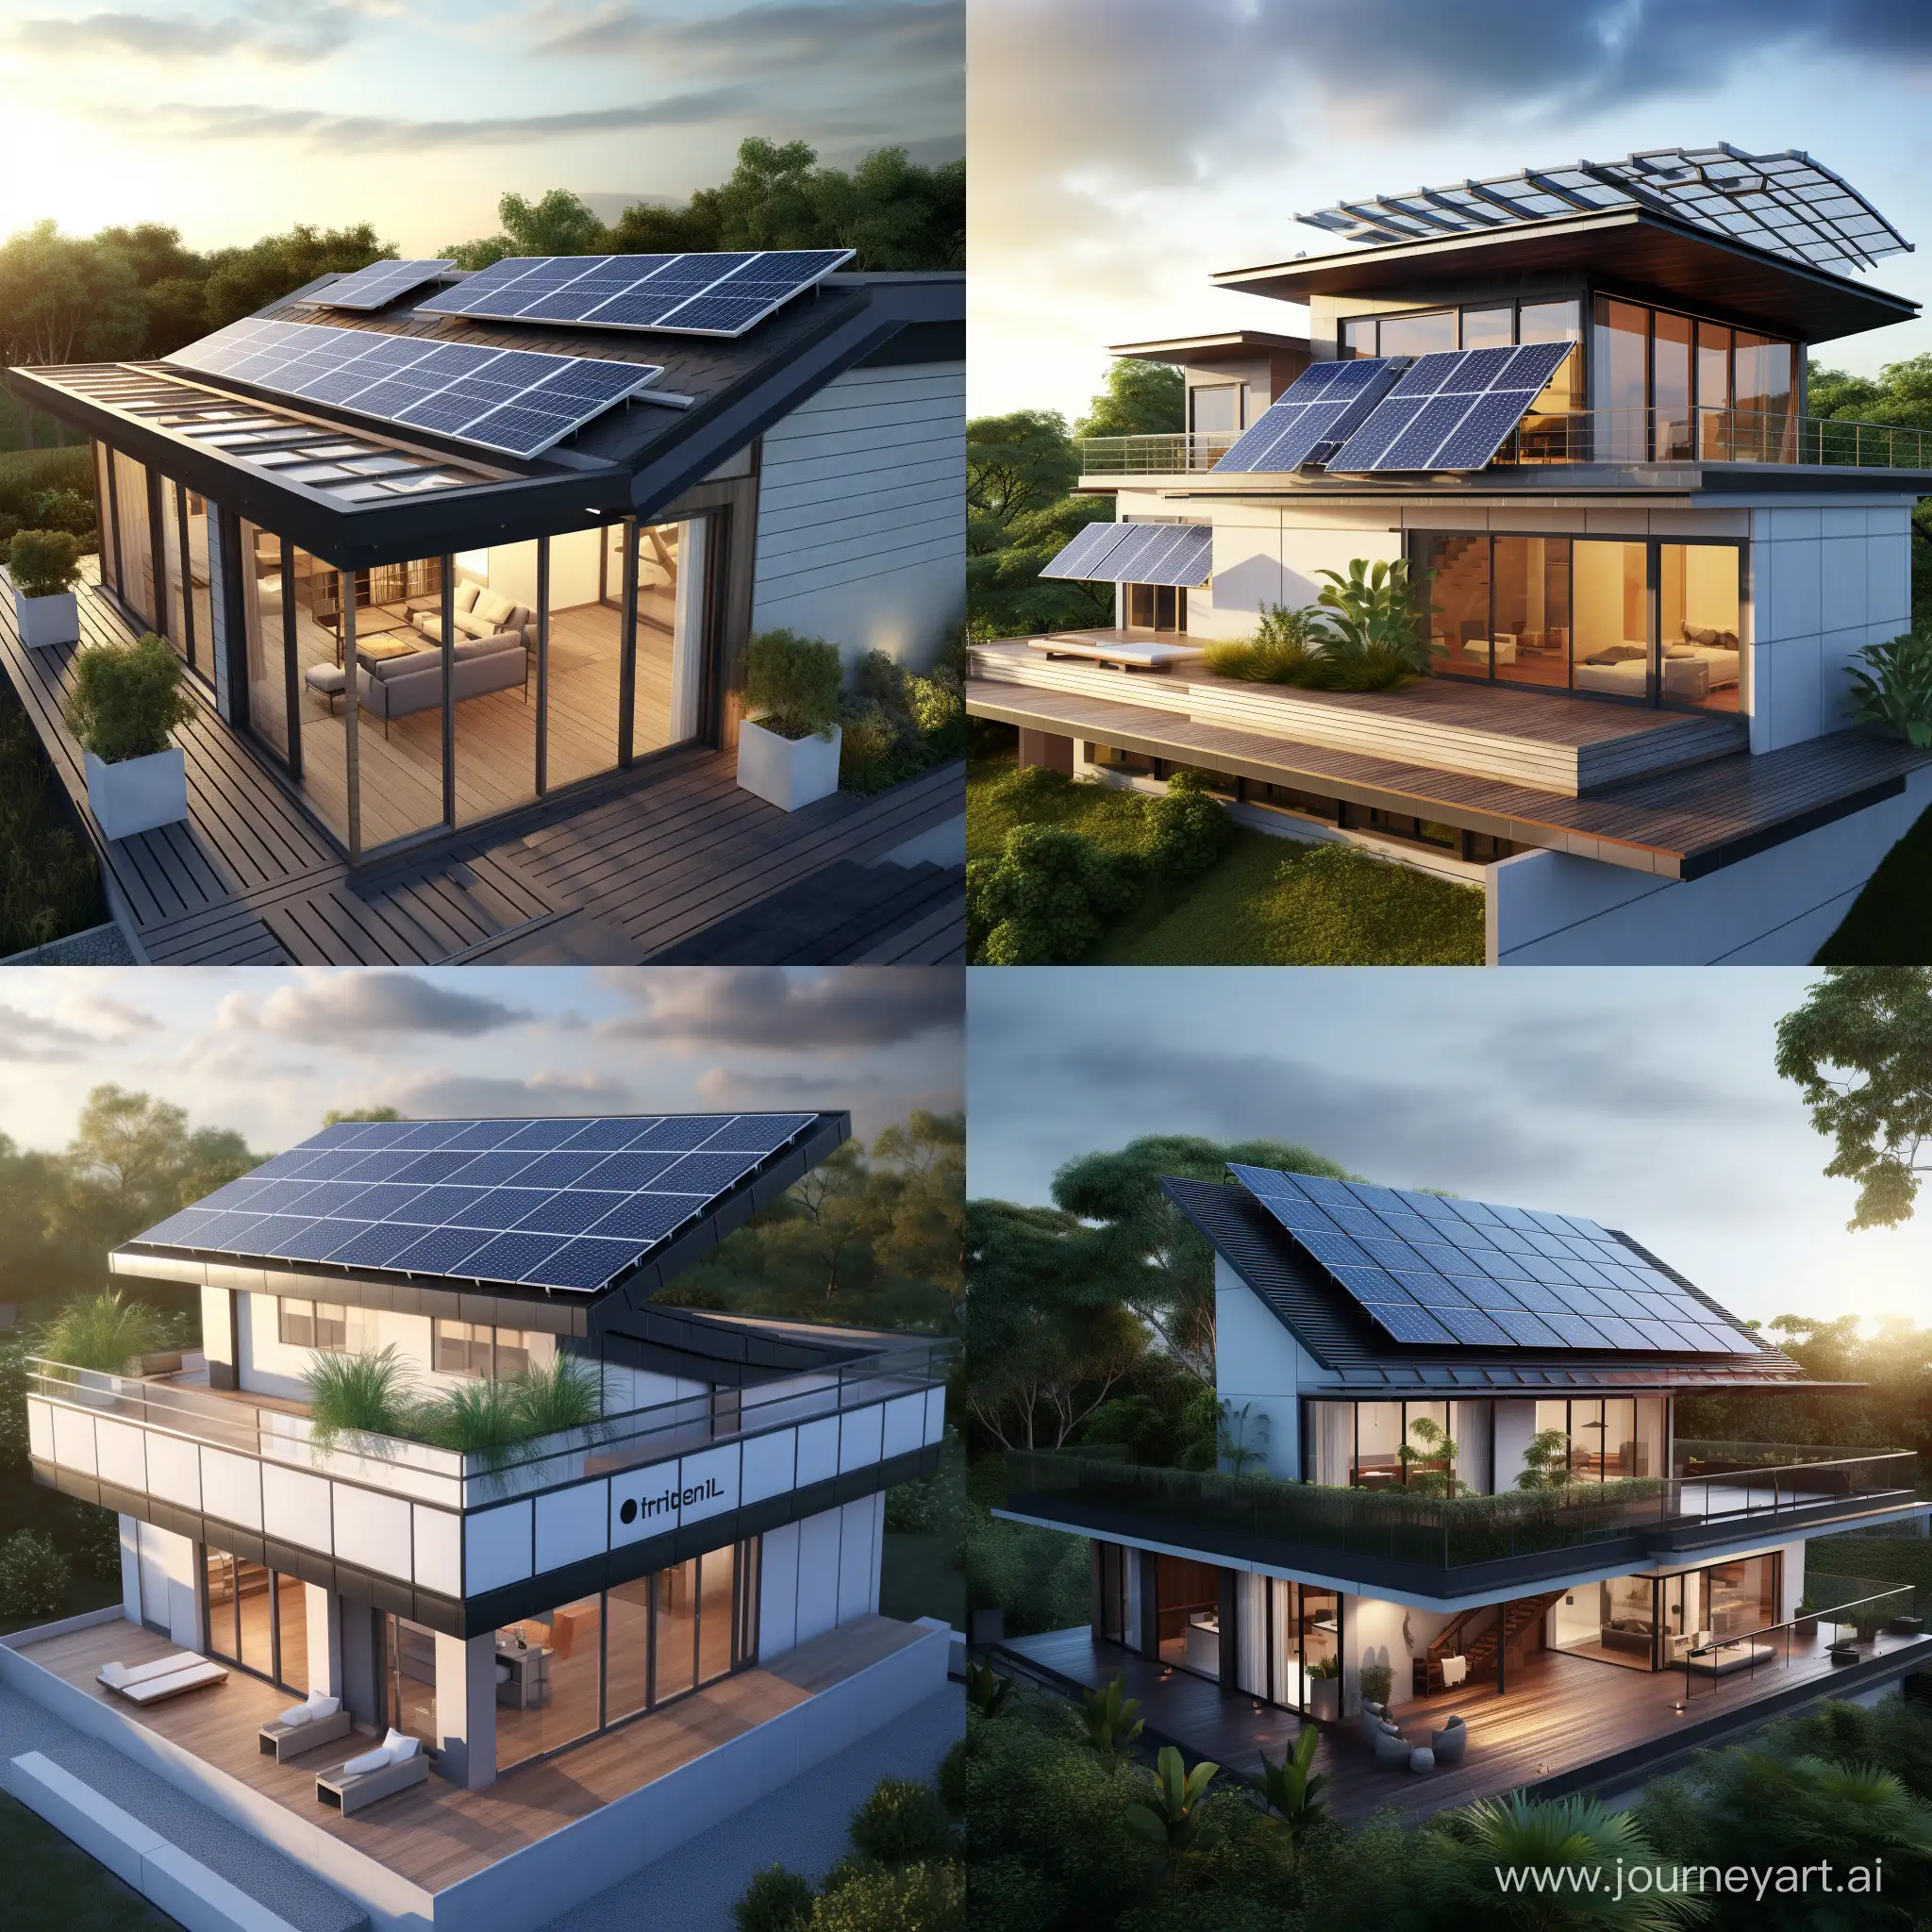 Solar-Panel-System-on-Roof-EcoFriendly-Energy-Solution-with-15-Panels-and-Hybrid-Inverter